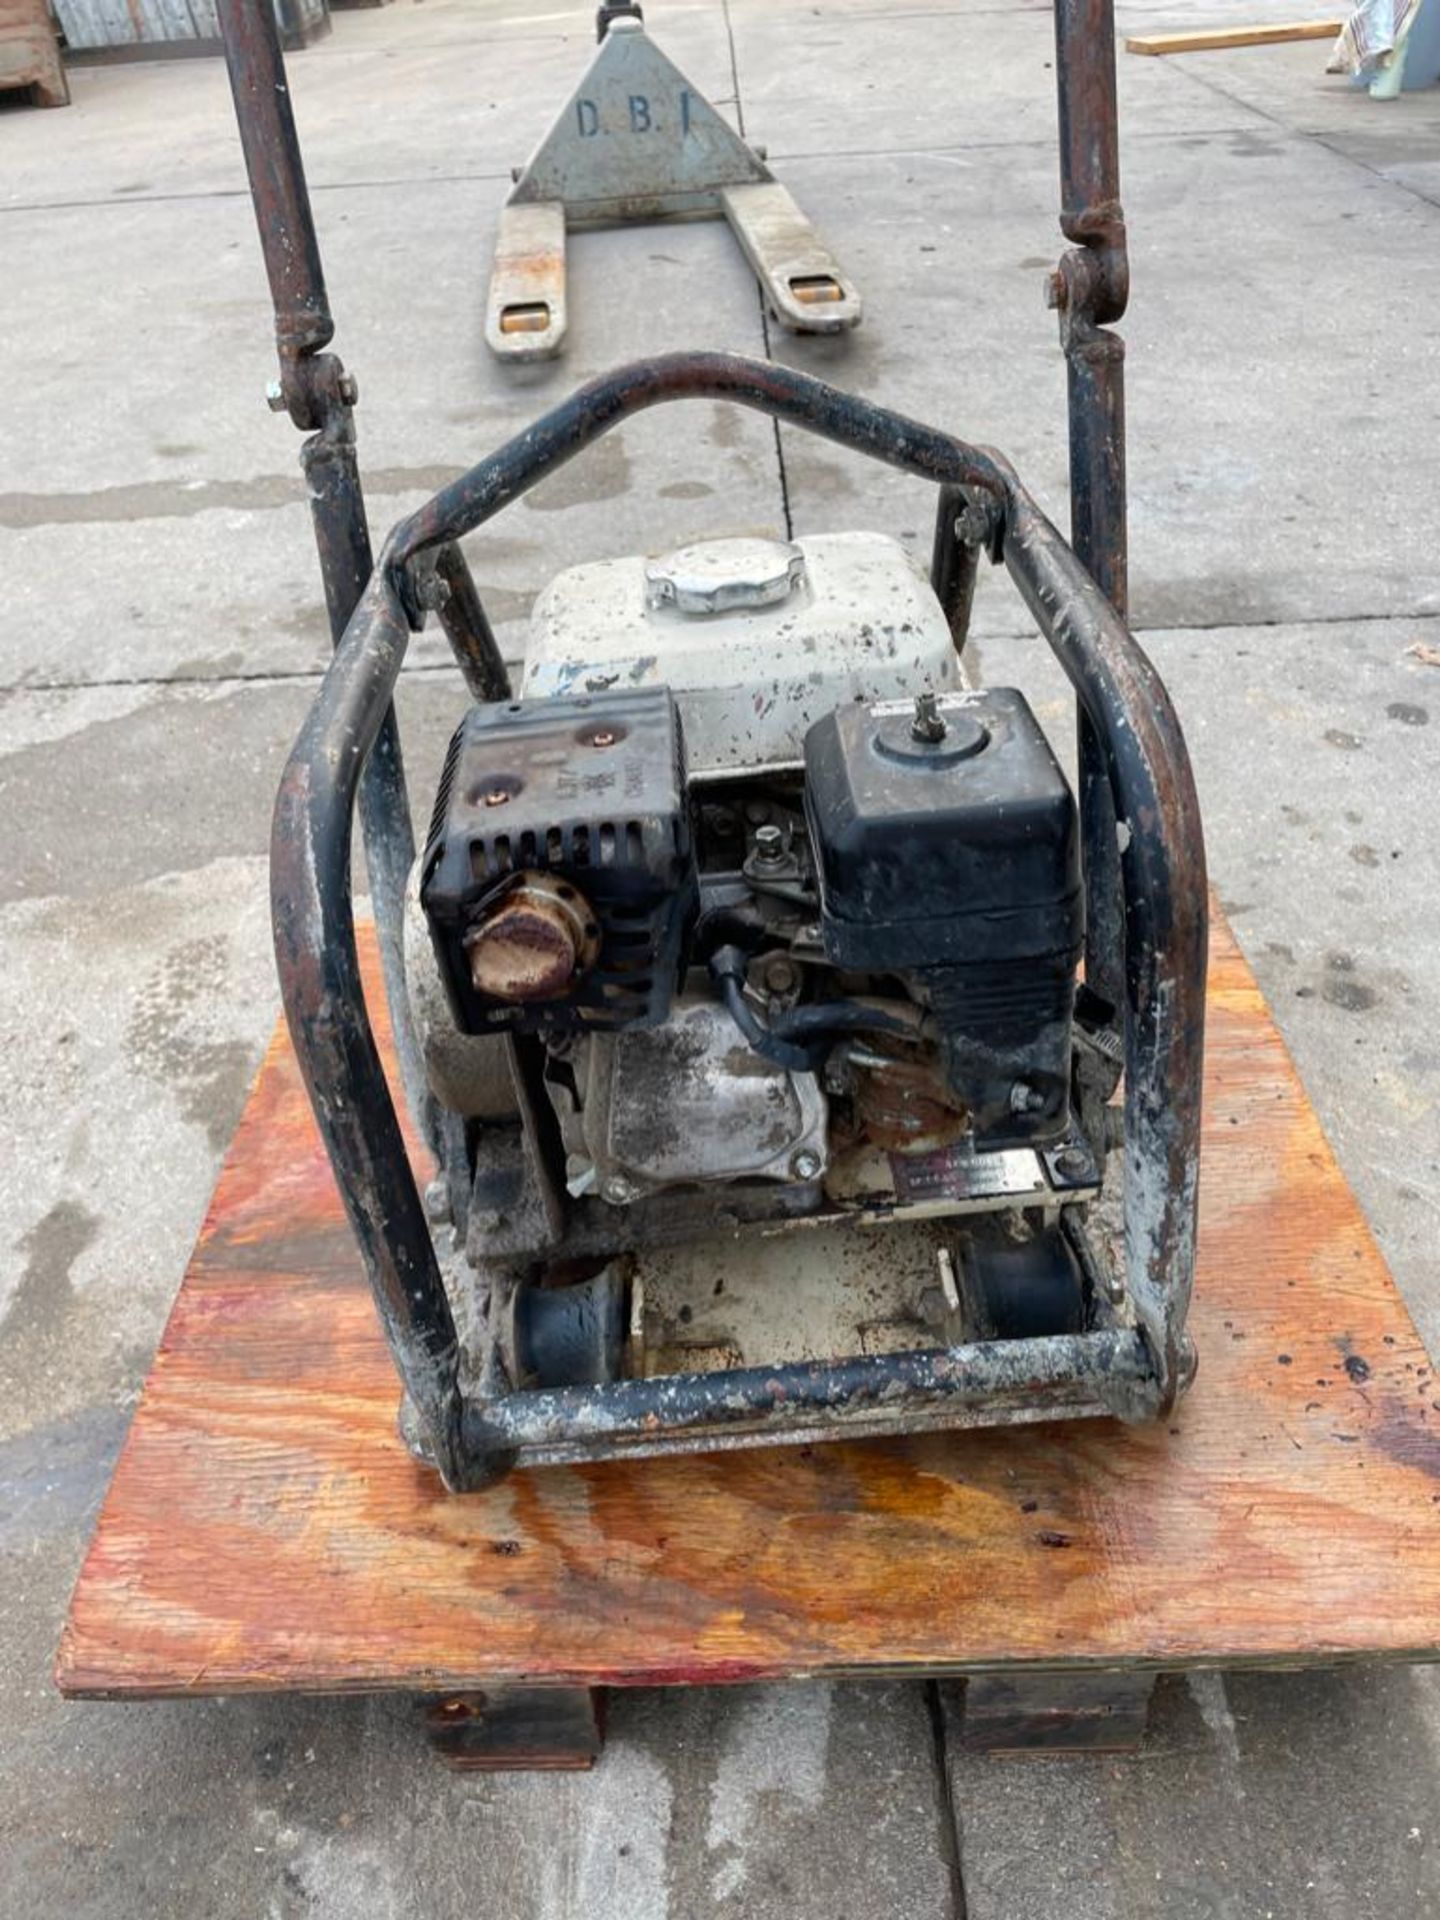 2005 Ingersoll-Rand BX-60WH Plate Compactor, Serial #SF1160, Honda GX160 Motor. Located in Hazelwood - Image 3 of 7